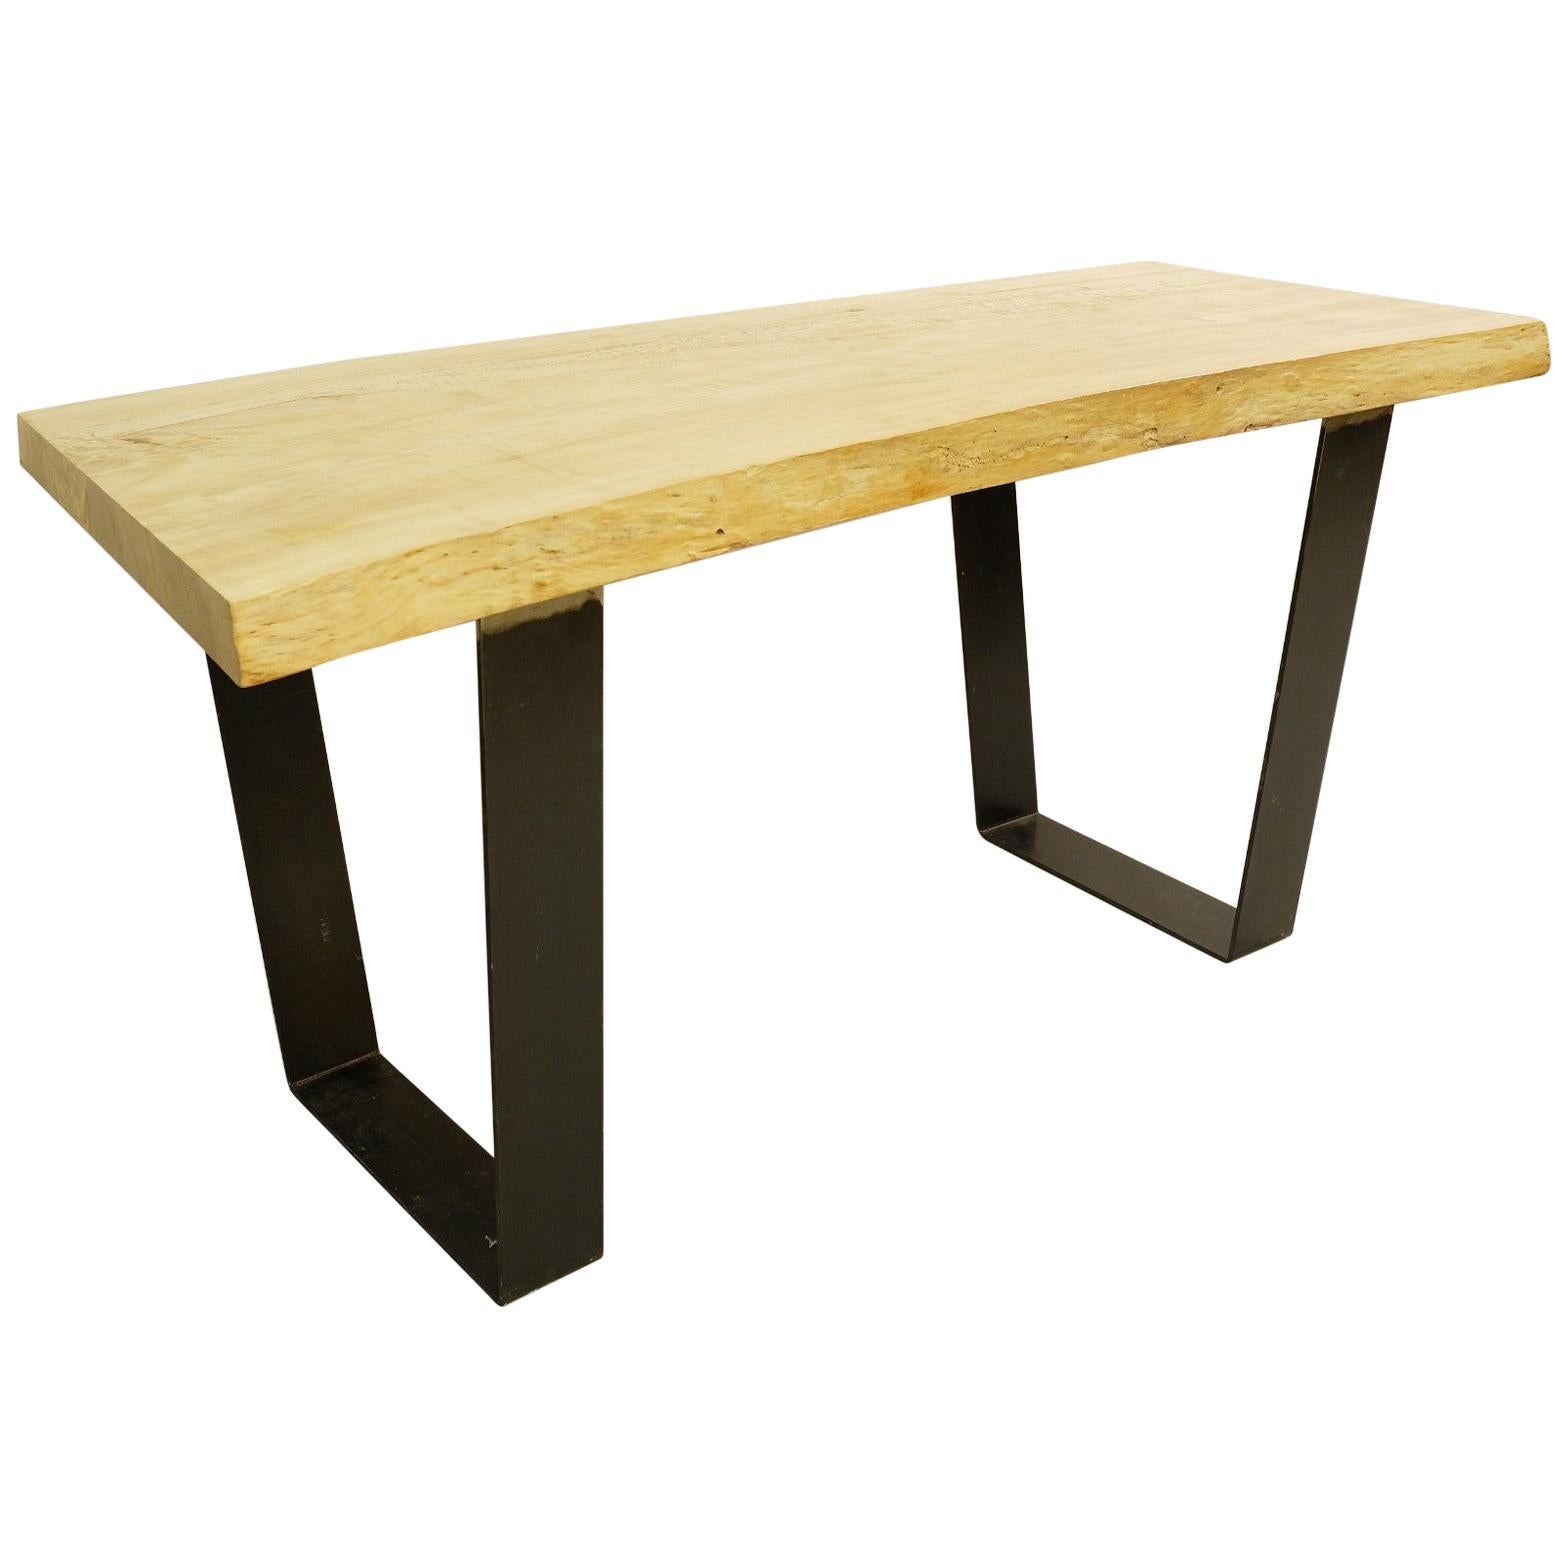 Wood Top Dining Table with Metal Legs